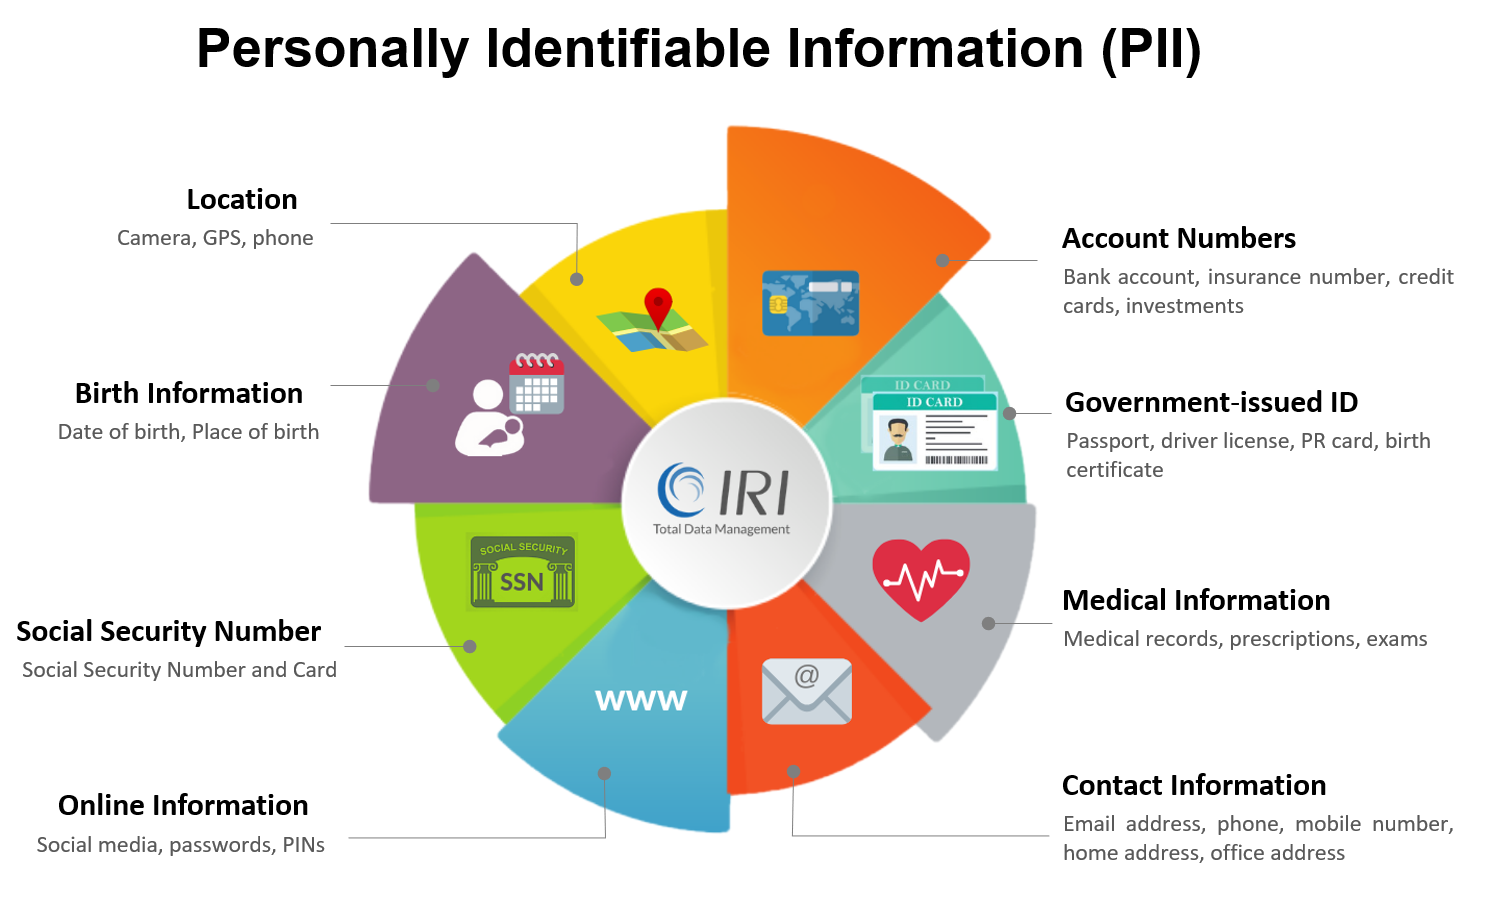 How to Classify, Find and Mask PII in Databases Using IRI FieldShield - IRI